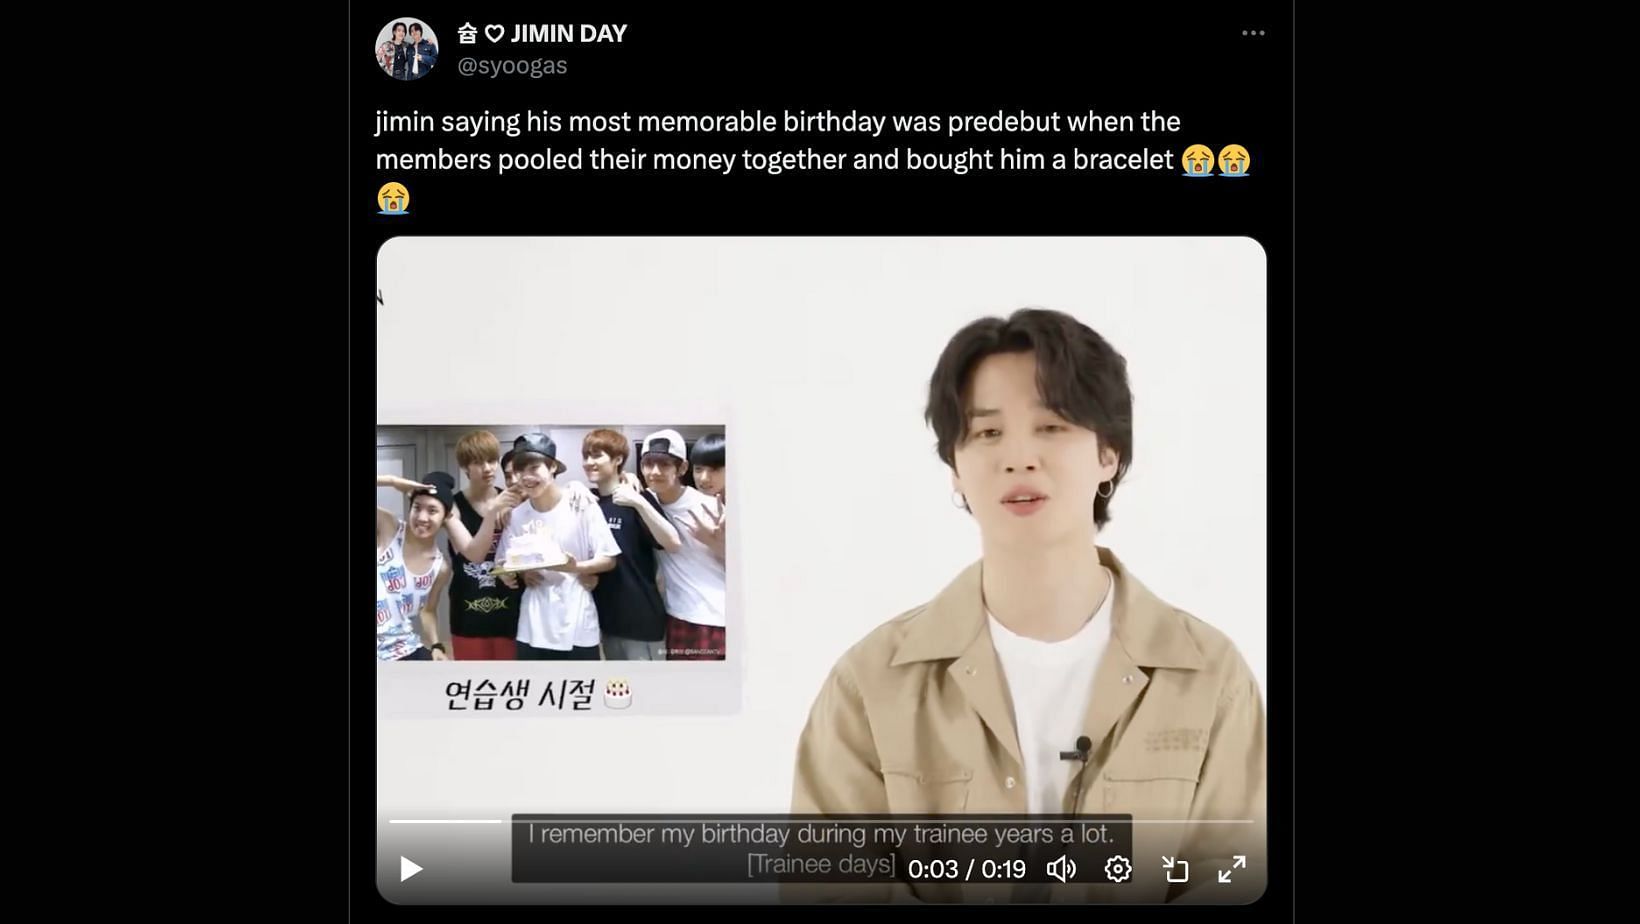 Fans react to the BTS idol&#039;s pre-debut birthday story in the Weverse&#039;s Keyboard Interview aired on YouTube. (Image via X/@syoogas)